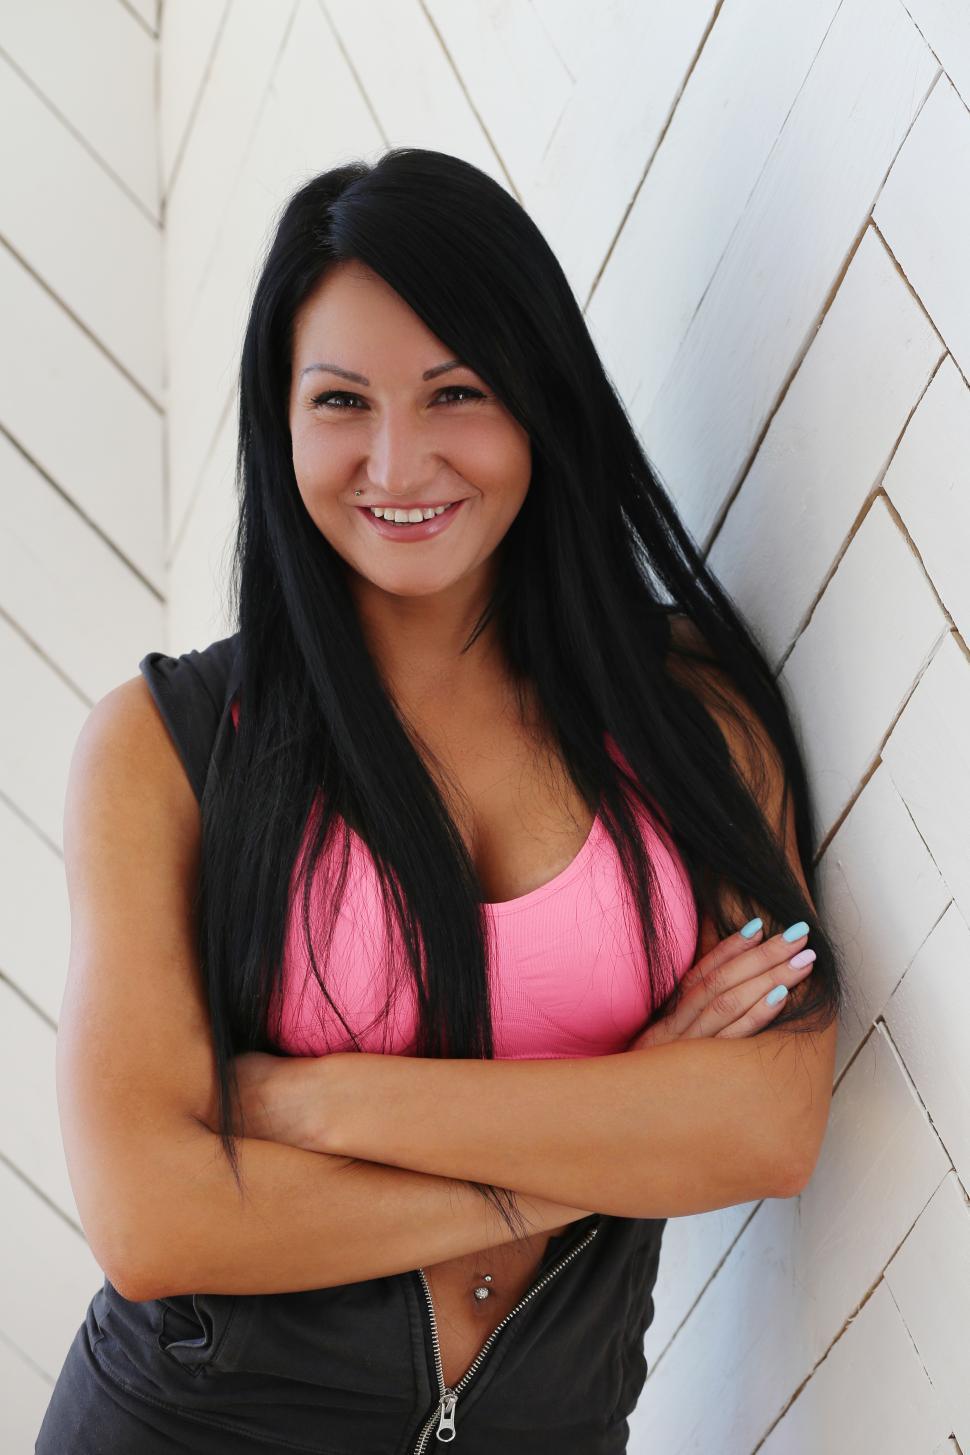 Free Image of Dark haired woman in workout gear 